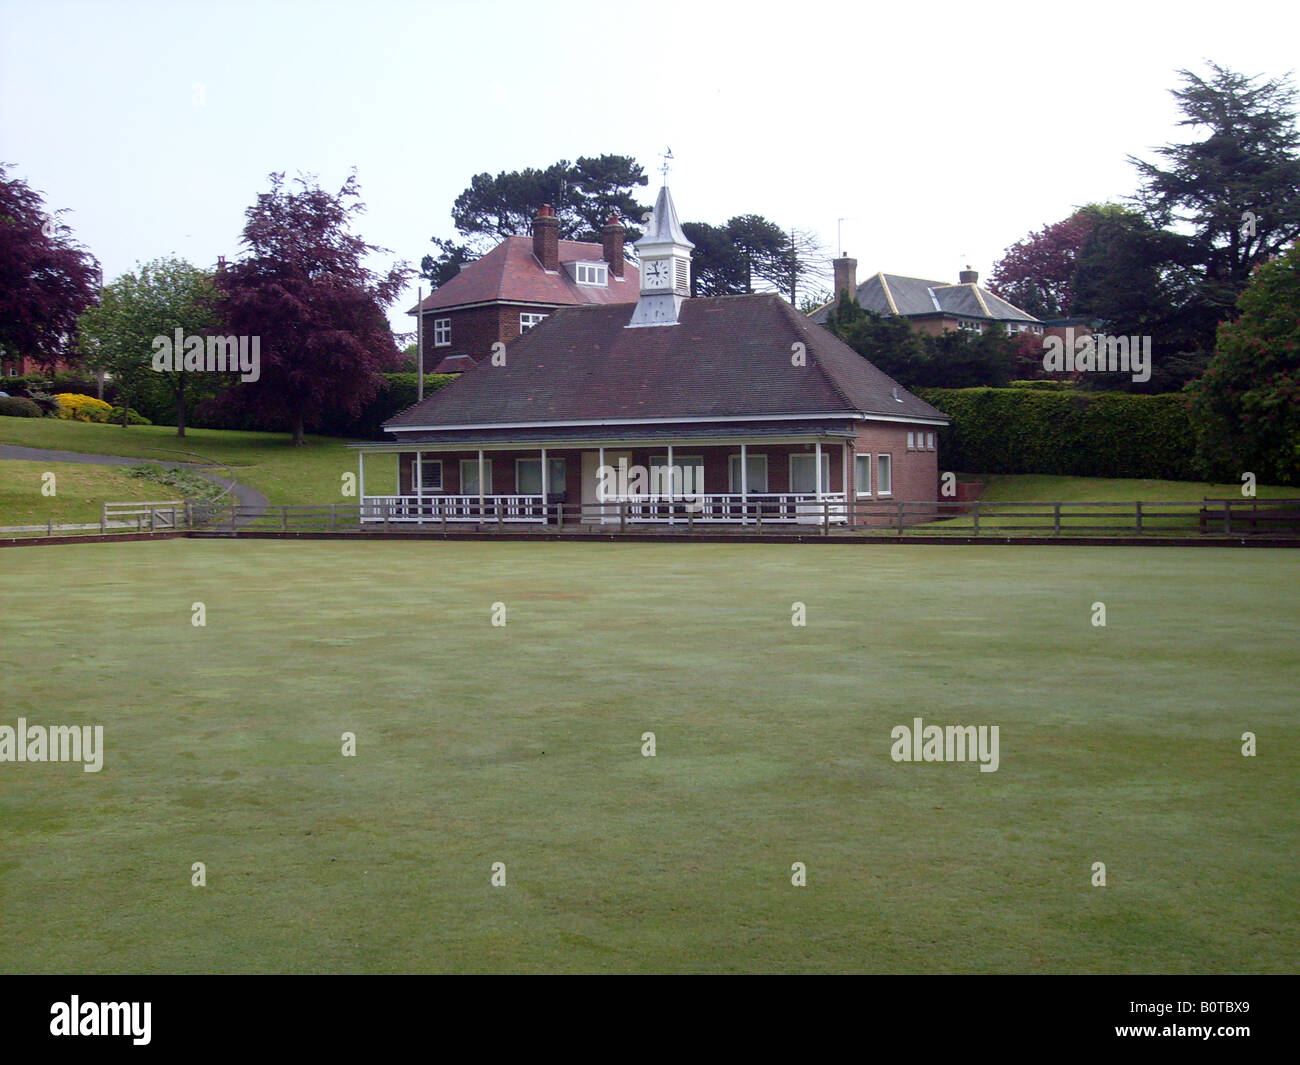 Inglese bowling green pavilion, Scalby Village Scarborough, in Inghilterra. Foto Stock